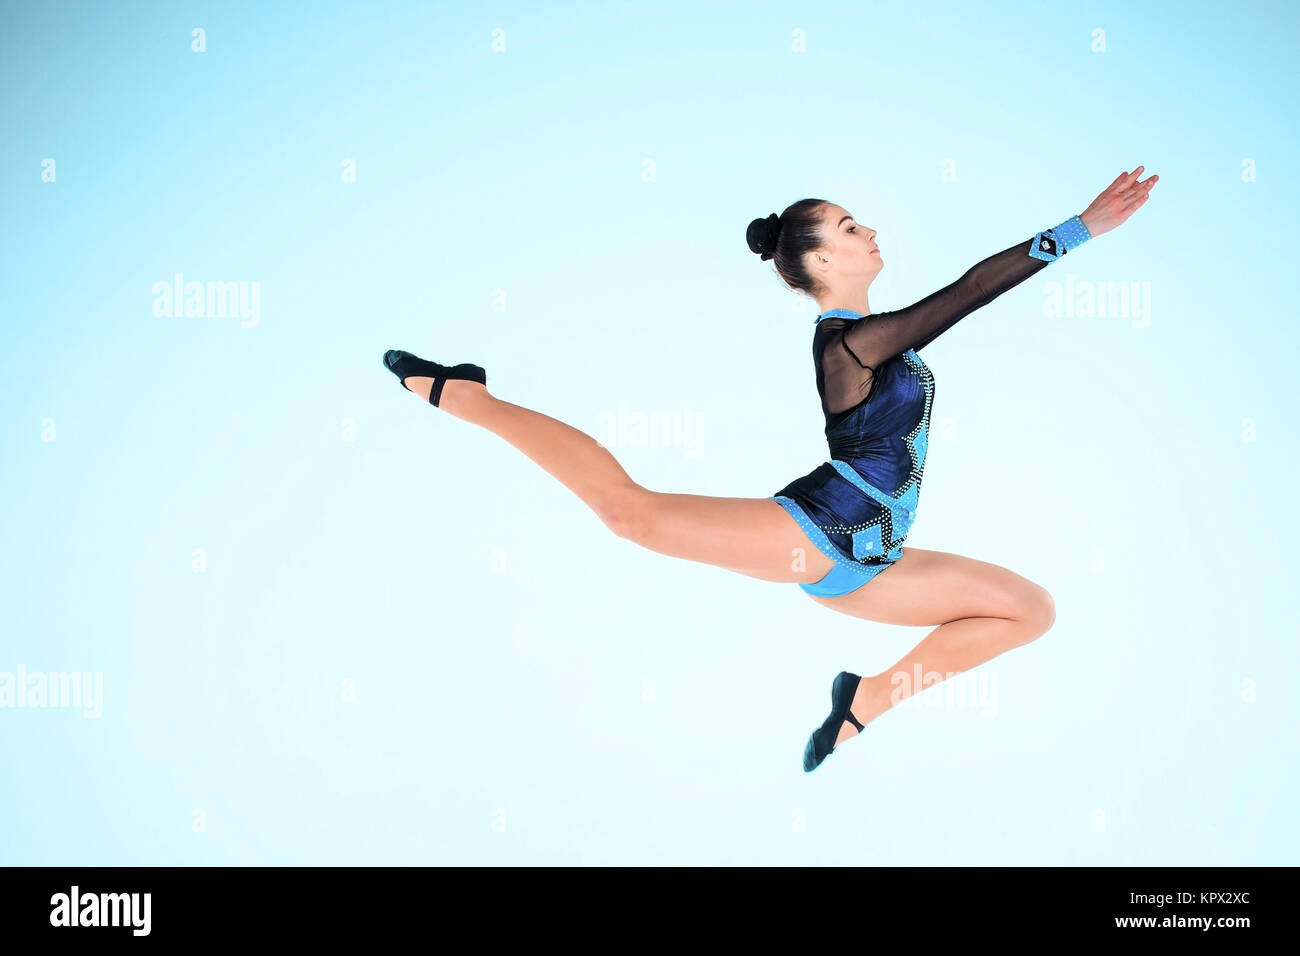 The girl doing gymnastics dance on a blue background Stock Photo